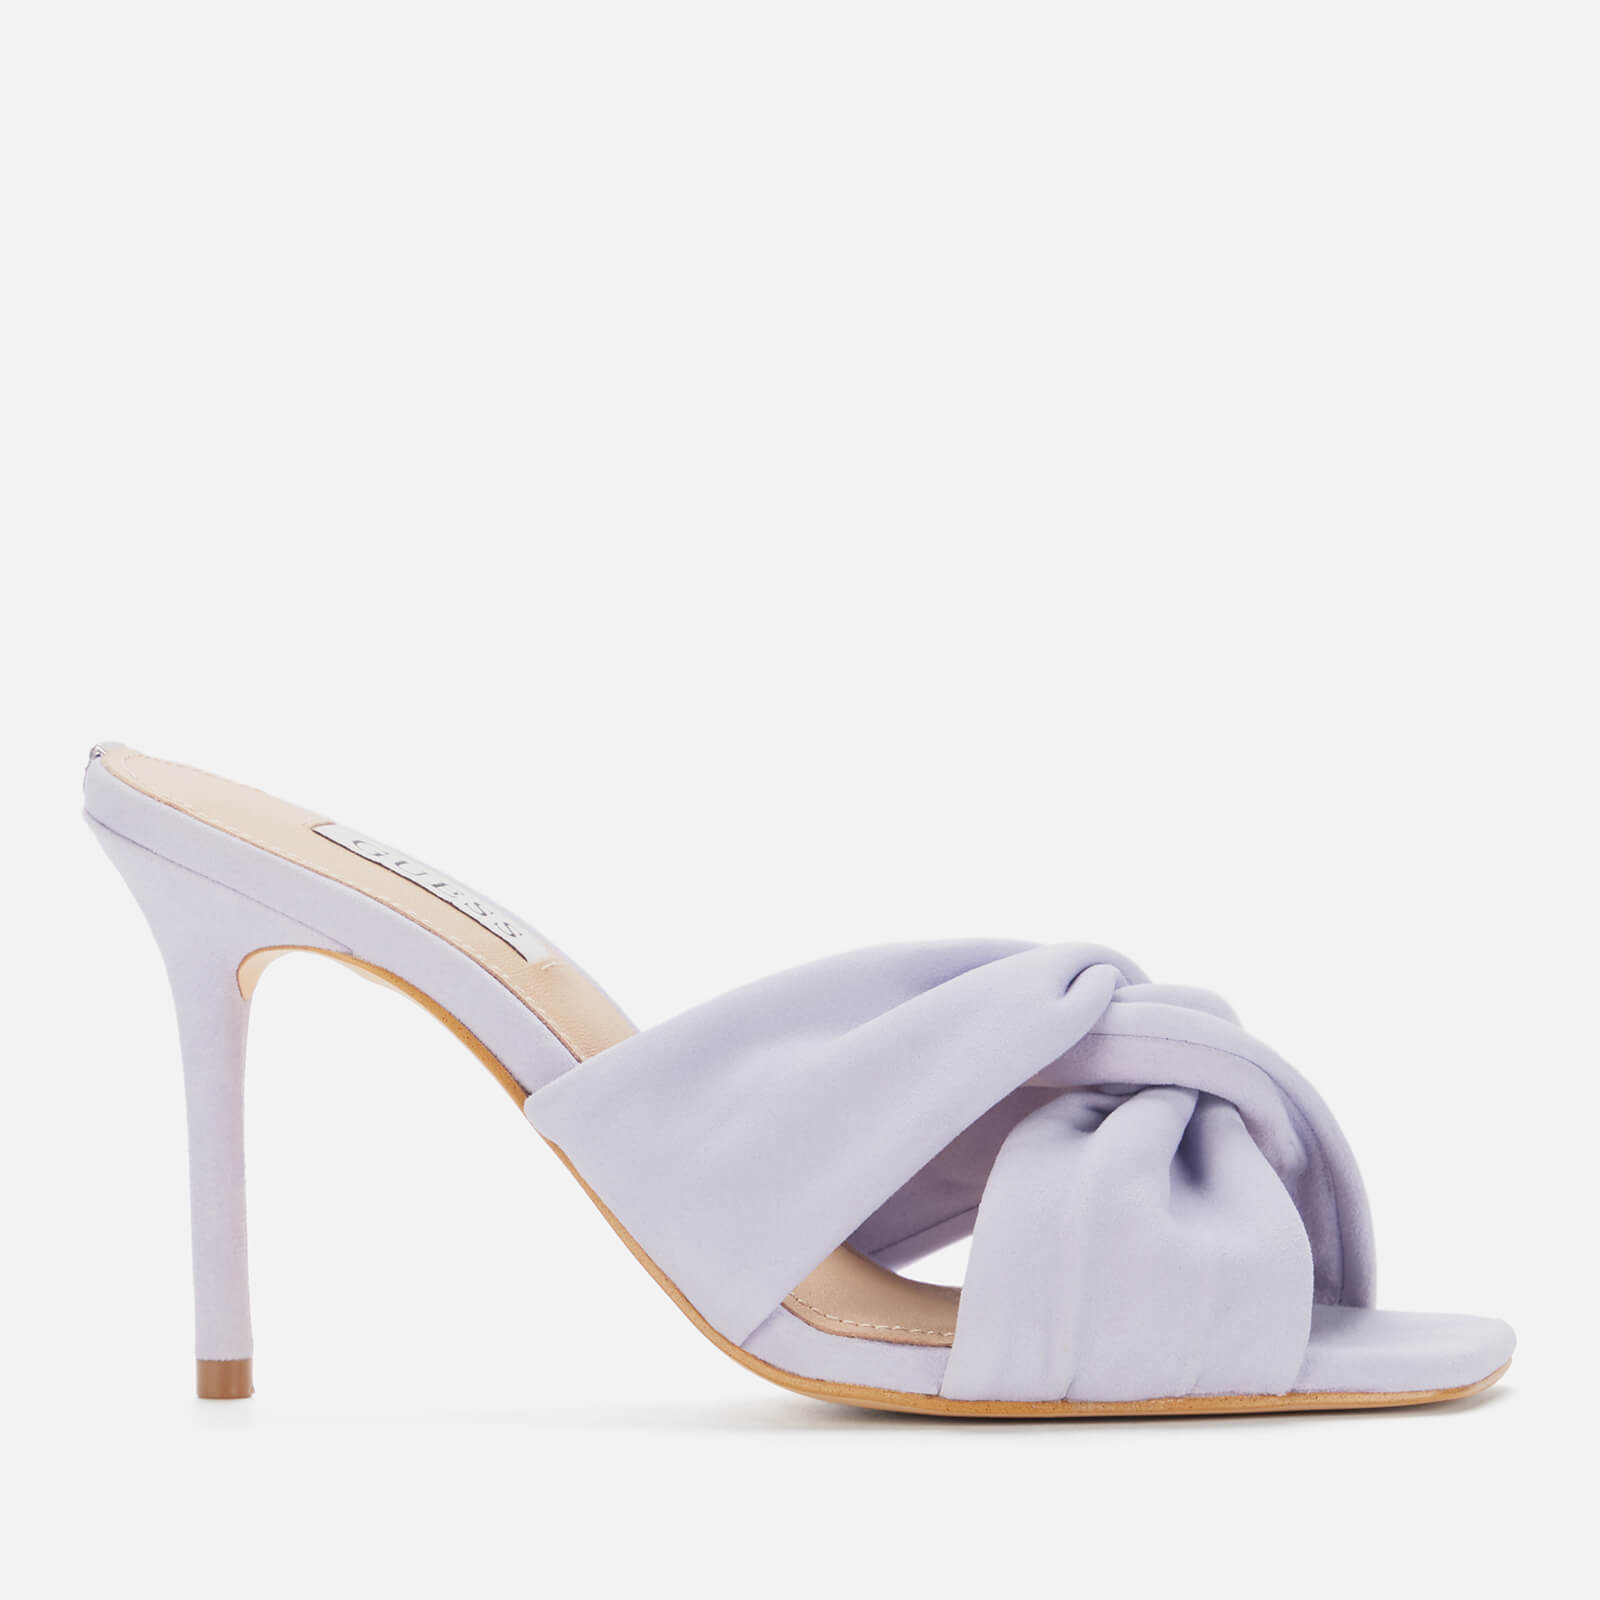 Guess Women’s Daiva Suede Heeled Mules - Lilac